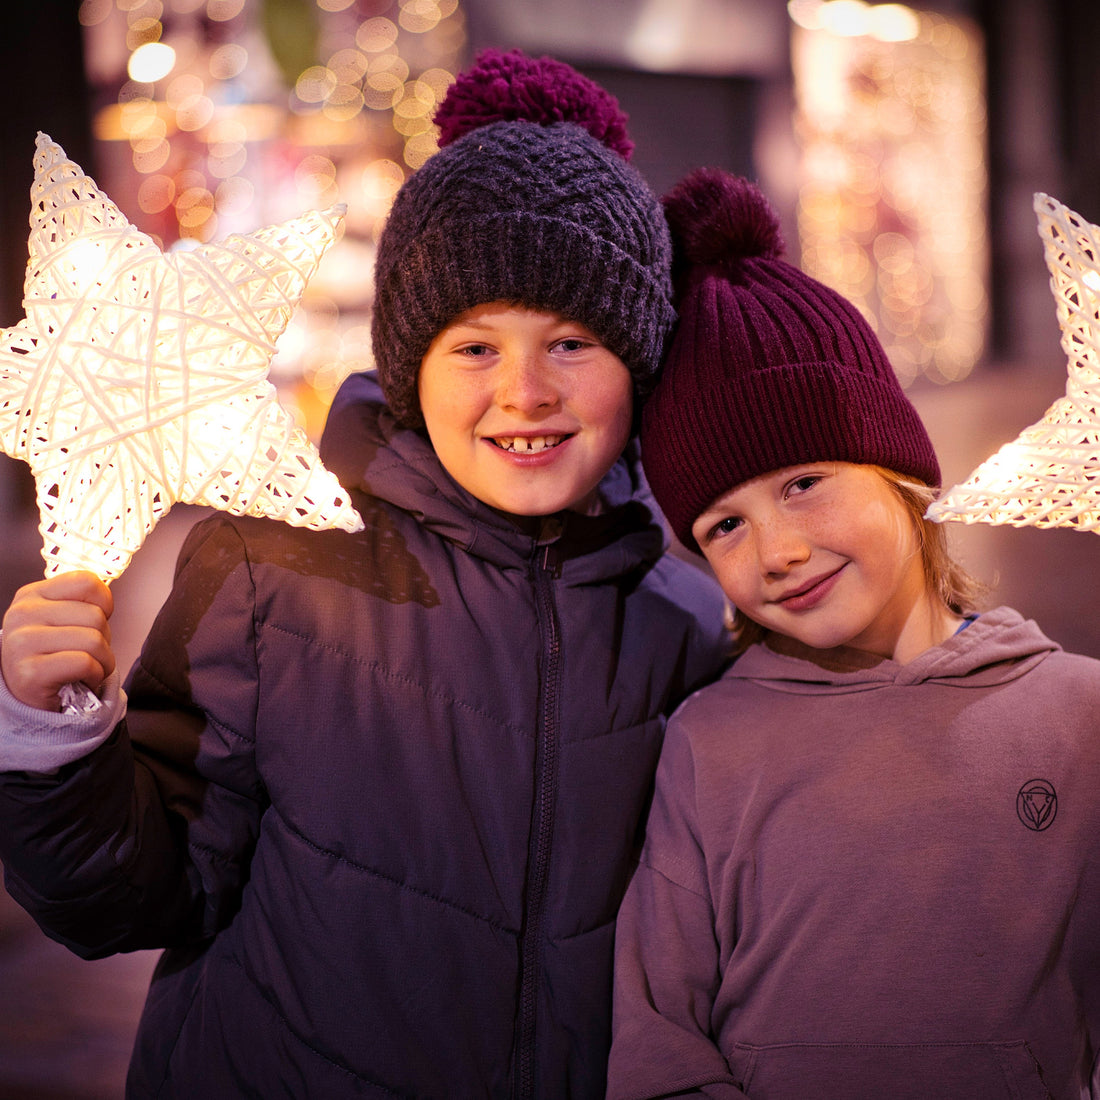 Follow Belfast One ‘Wish Upon a Christmas Star’  trail